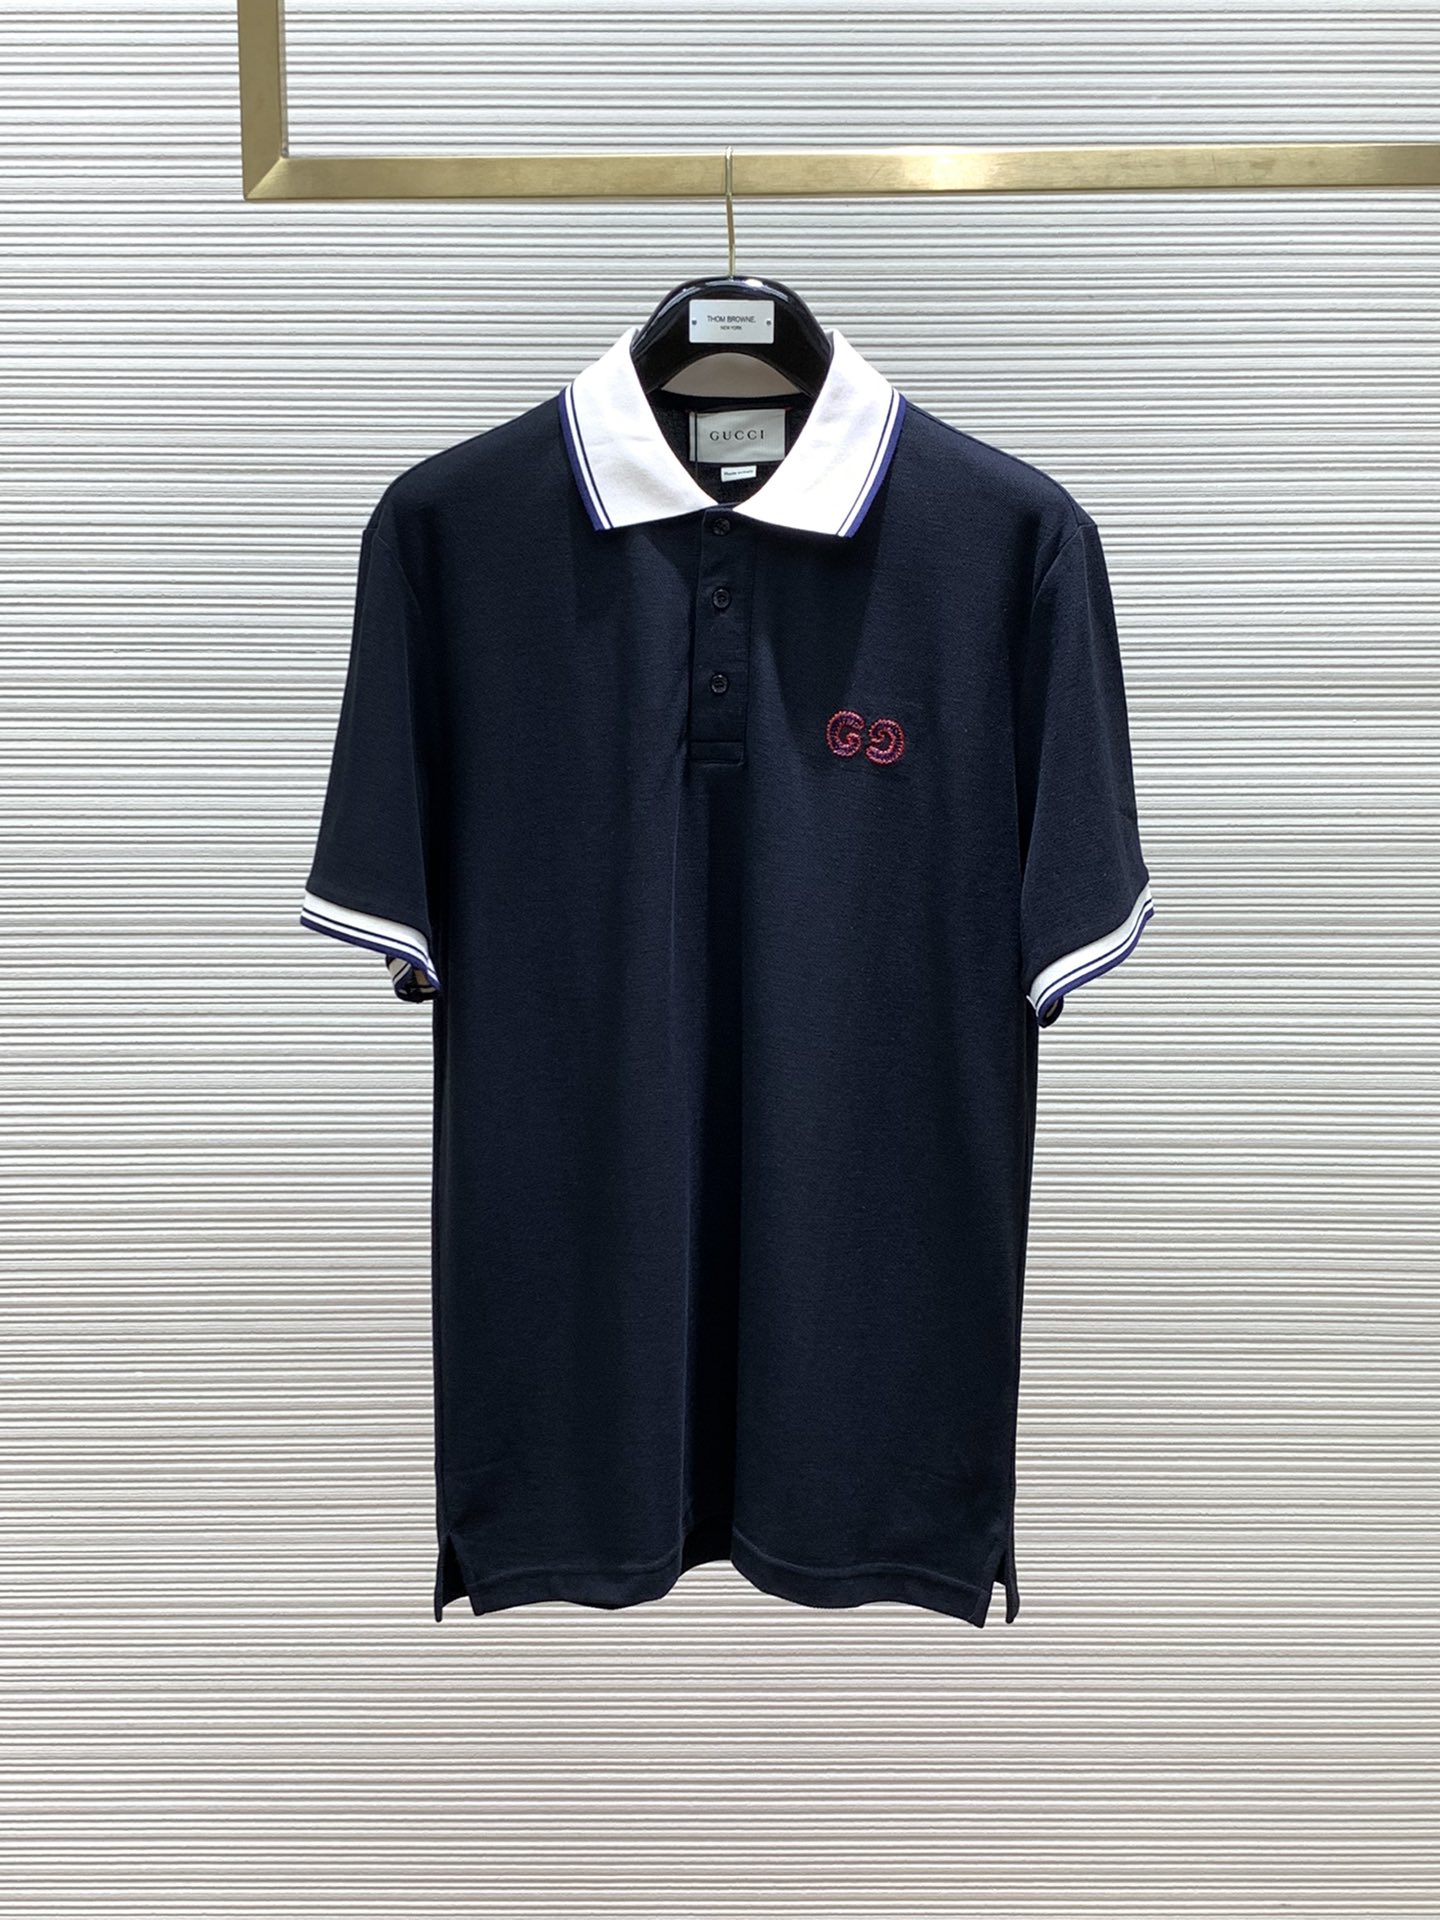 Gucci Best
 Clothing Polo T-Shirt Embroidery Spring/Summer Collection Fashion Short Sleeve